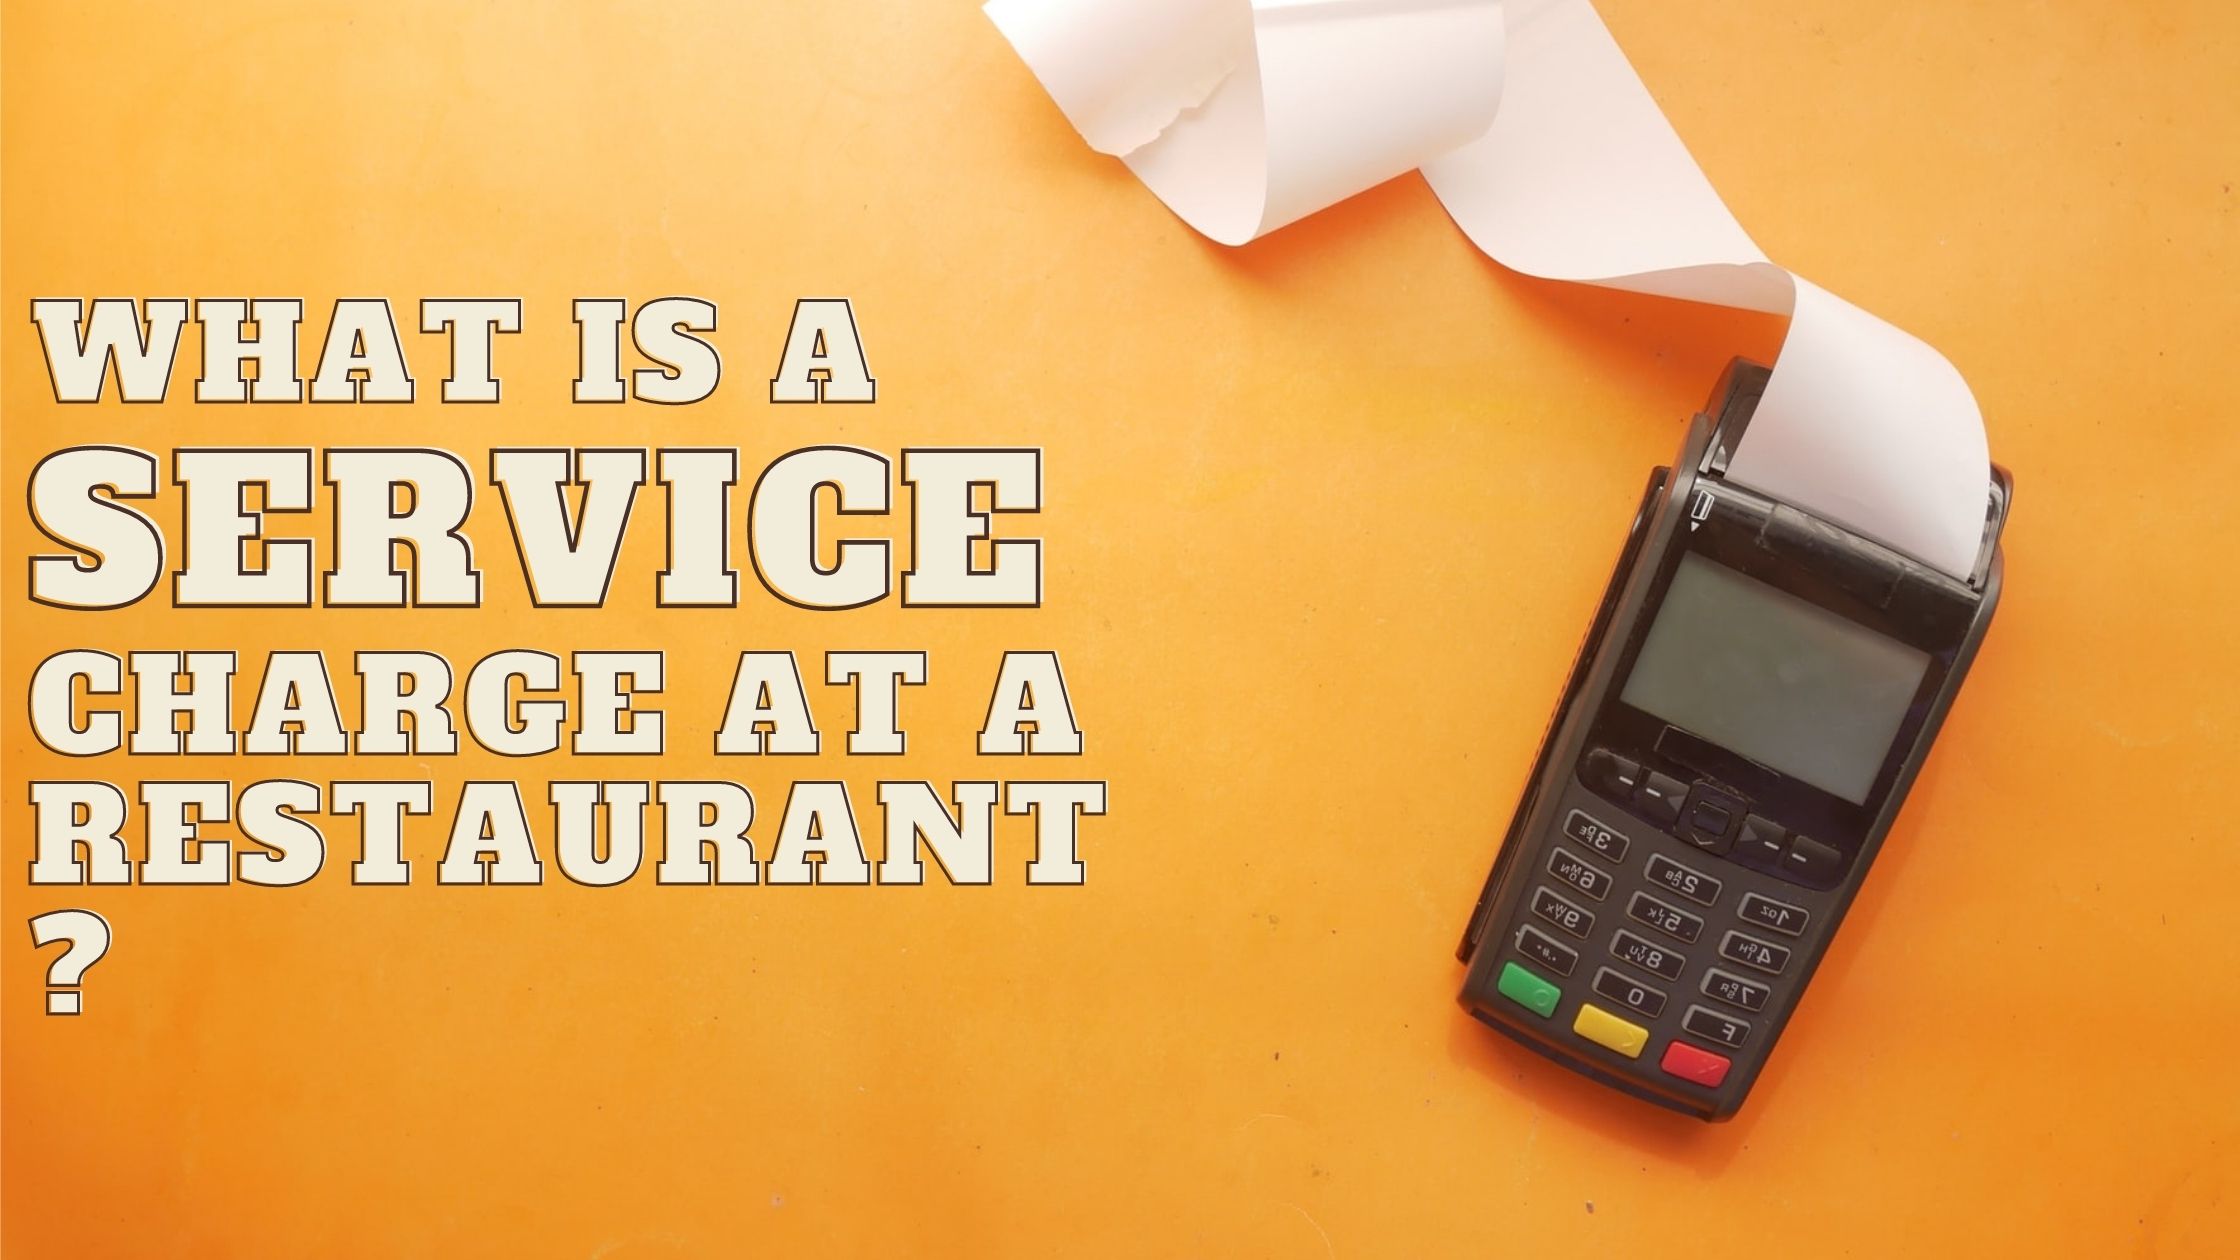 What is a service charge at a restuarant?